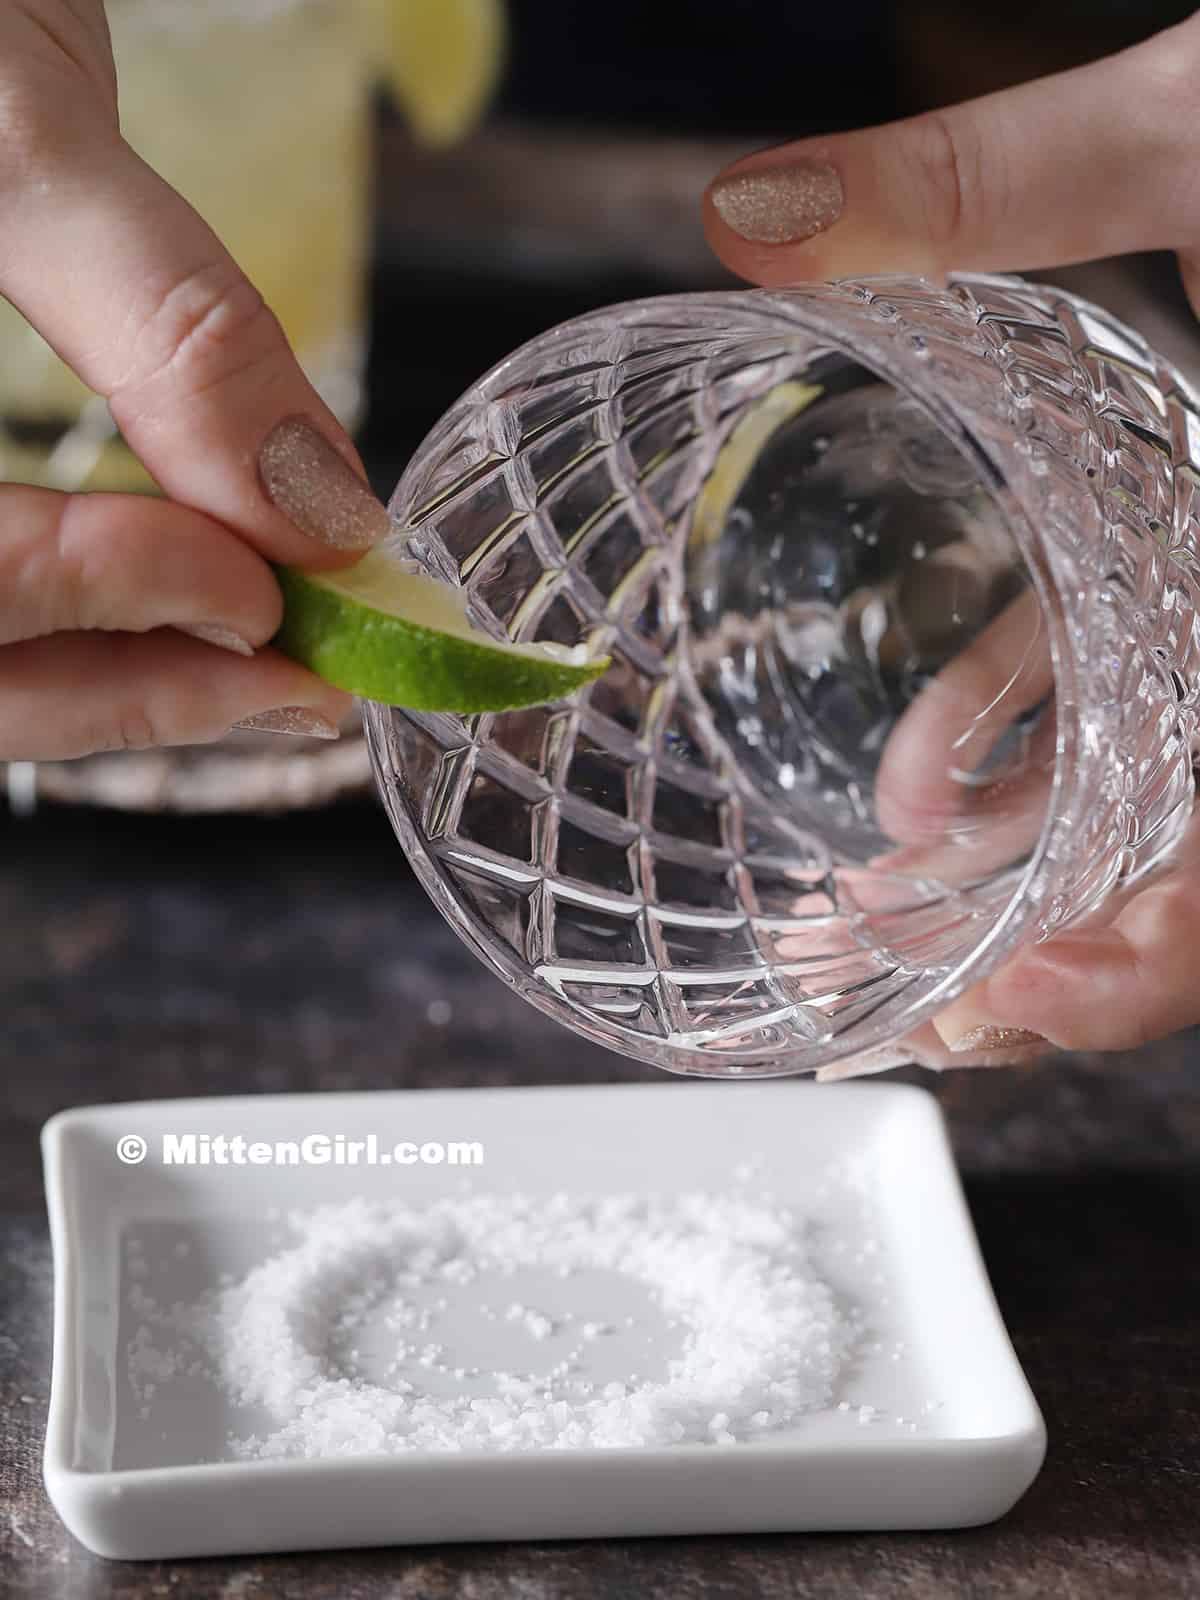 A hand running a lime slice around the rim of a rocks glass.